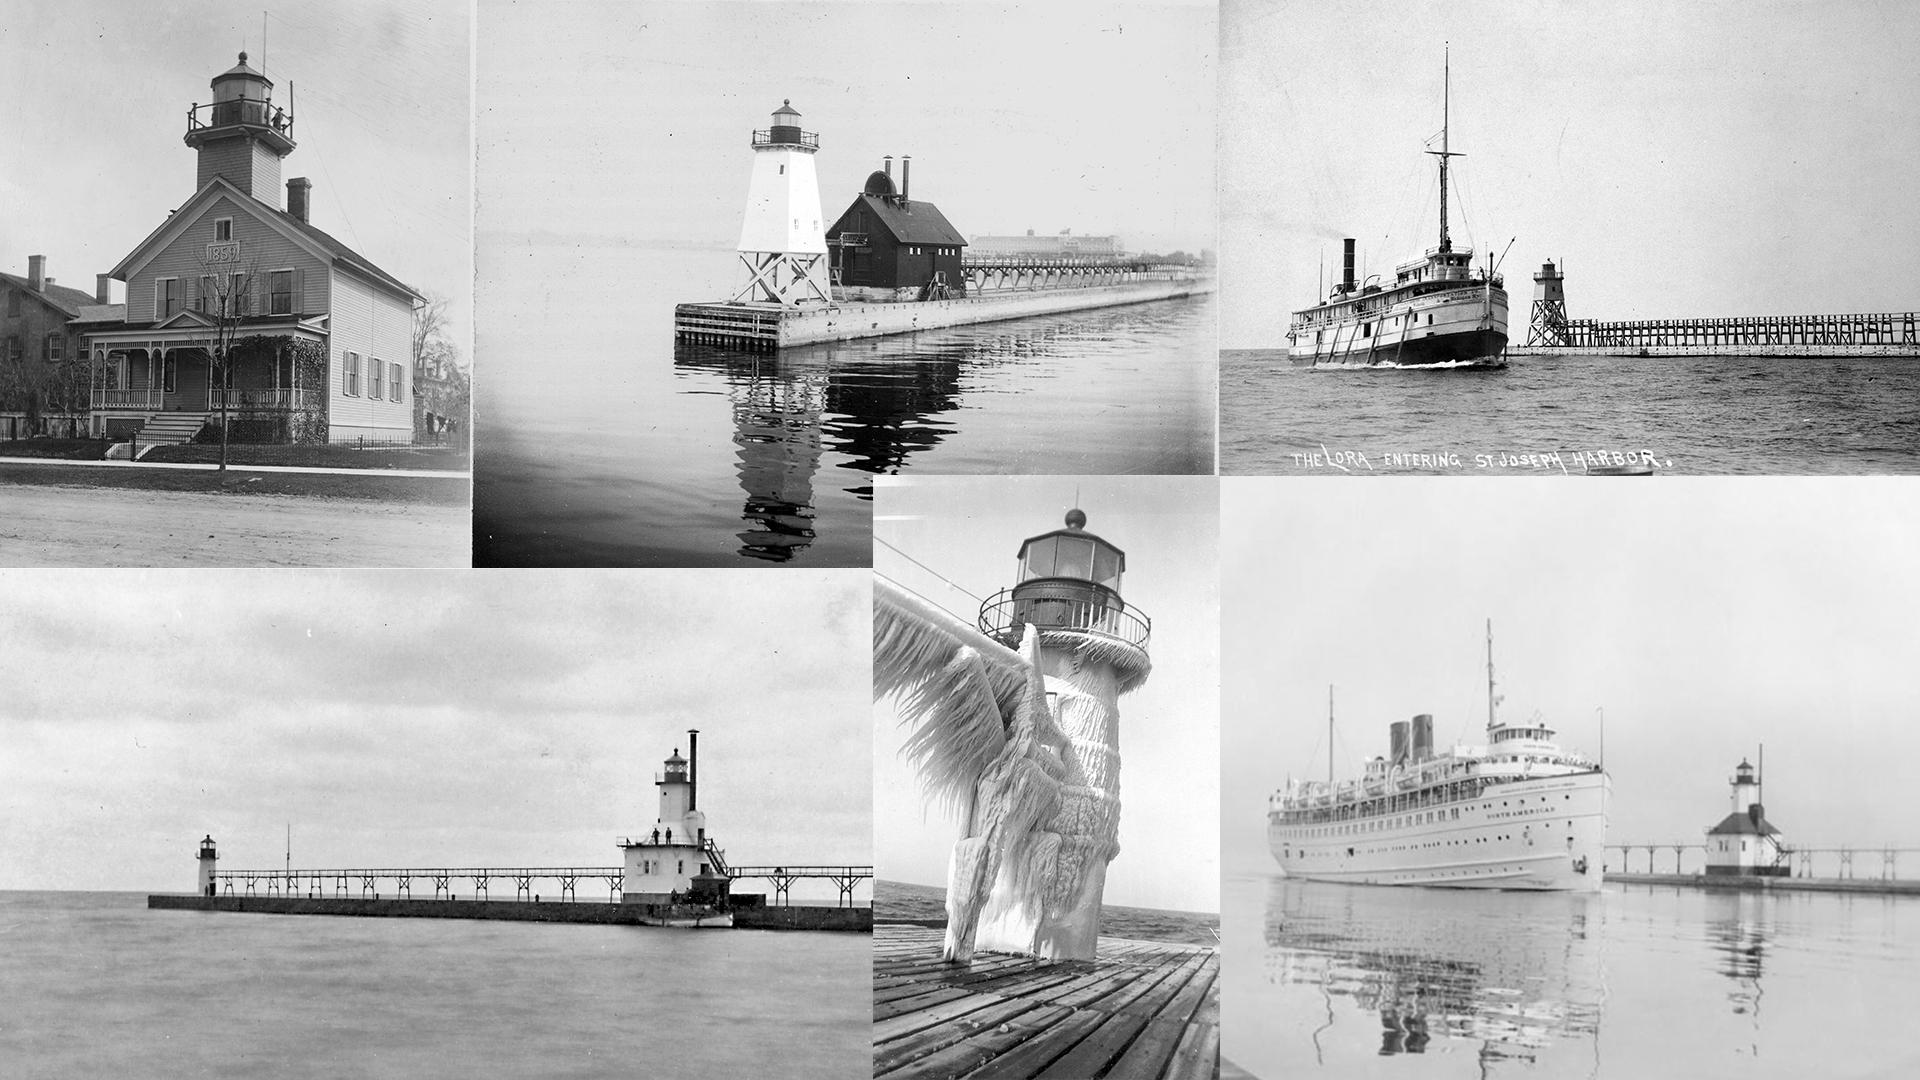 Historical images of the lighthouses.